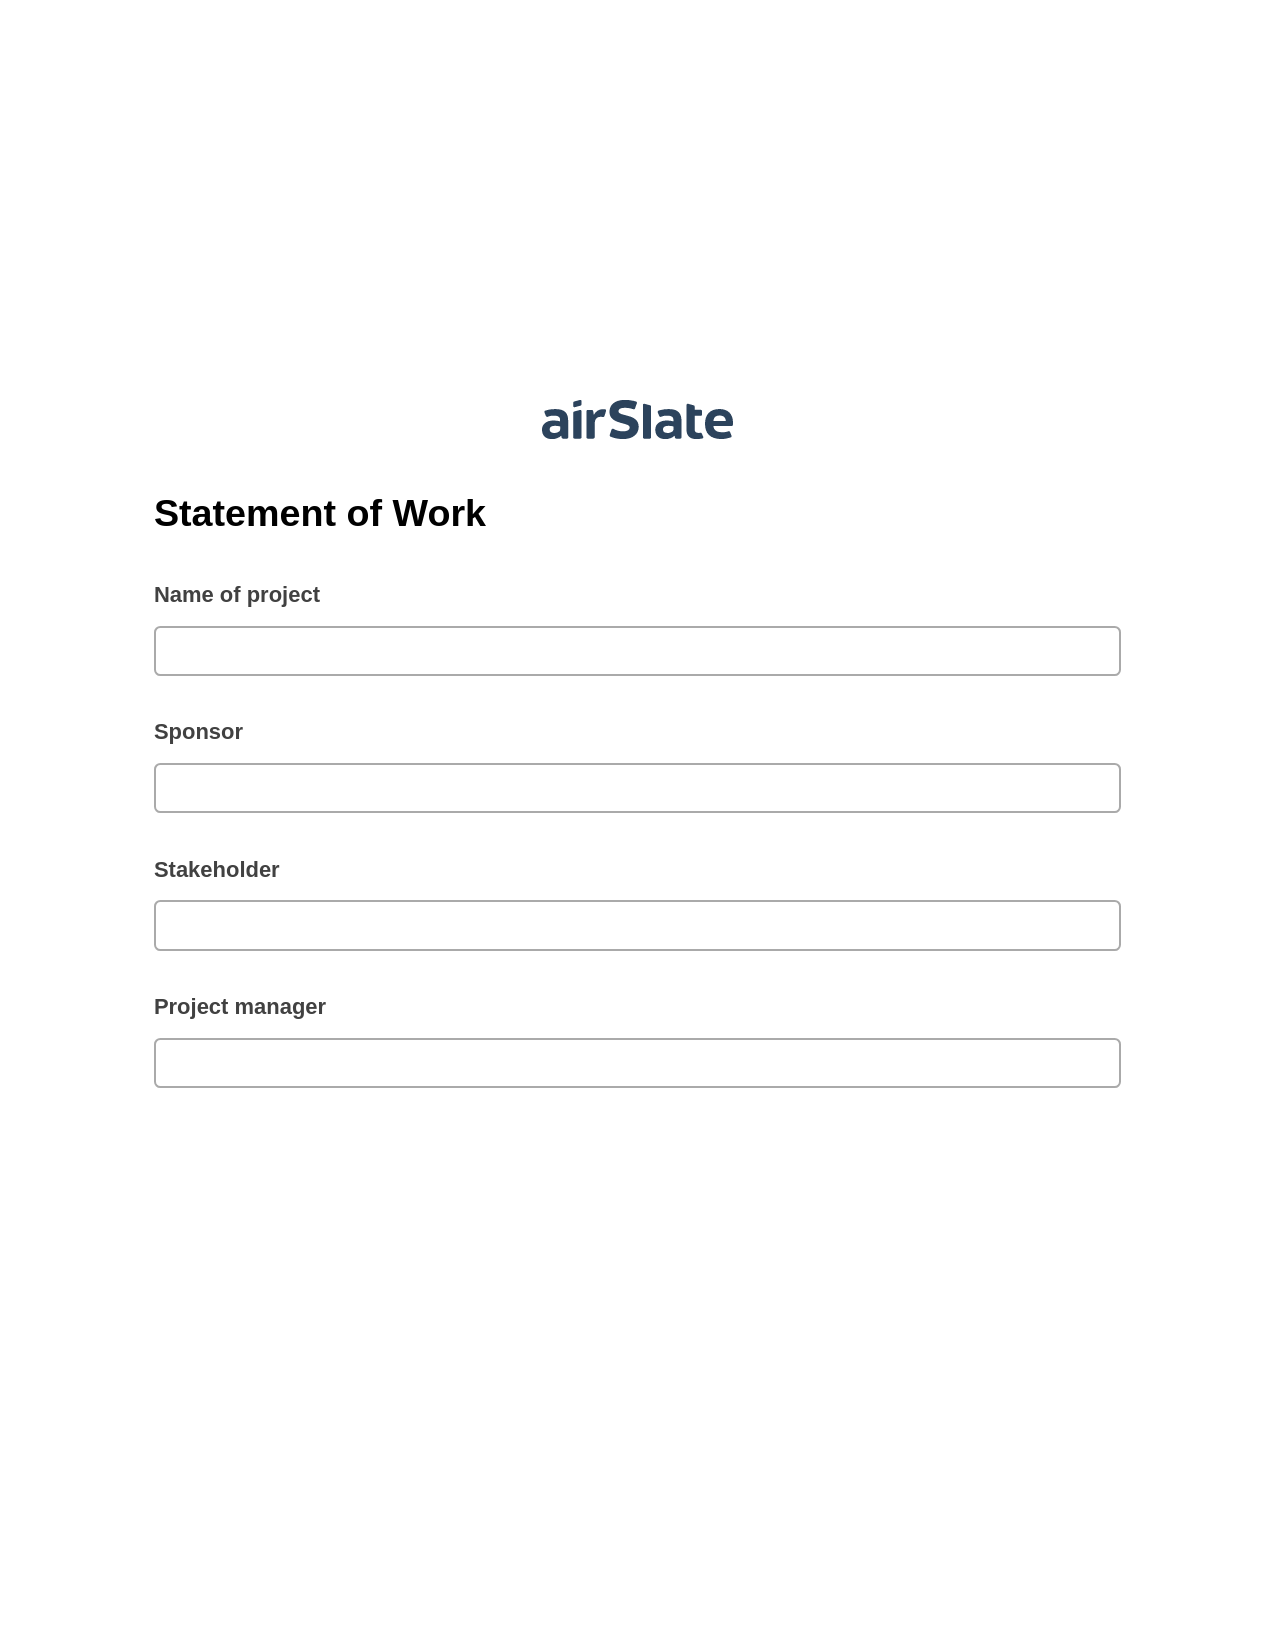 Multirole Statement of Work Pre-fill from CSV File Dropdown Options Bot, Create Slate every Google Sheet Update Bot, Export to Formstack Documents Bot